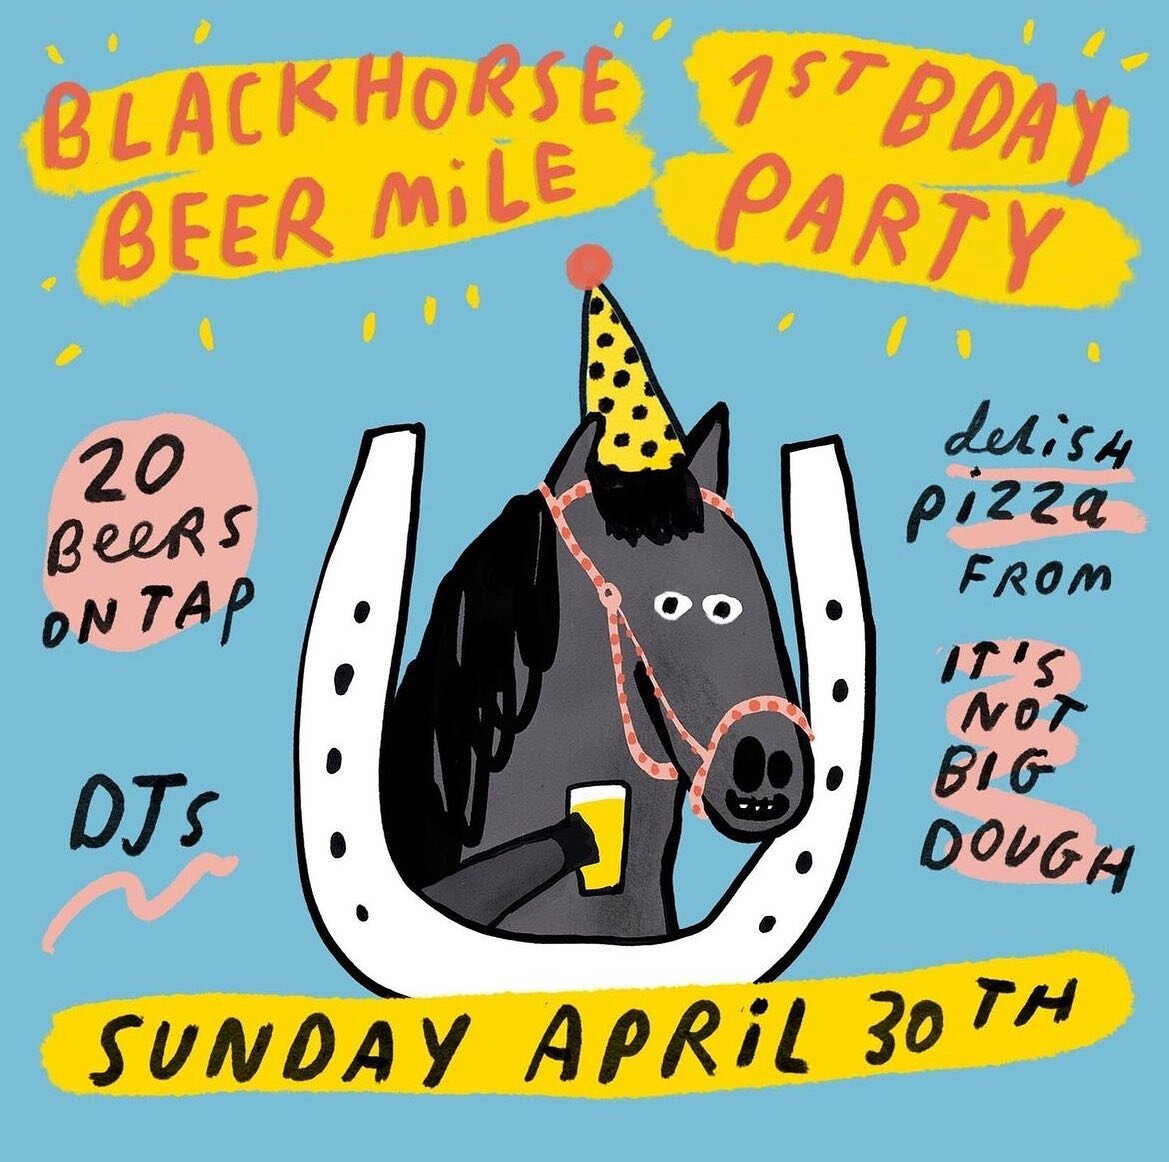 LESS THAN A WEEK TO GO 💙💛

BLACKHORSE BEER MILE 1st
BIRTHDAY // SUNDAY 30th APRIL

CANCEL ALL PLANS! A little reminder that next Sunday is the Blackhorse Beer Mile's 1st Birthday party!

My guys at @prettydecentbc, as well as the teams at @signatur